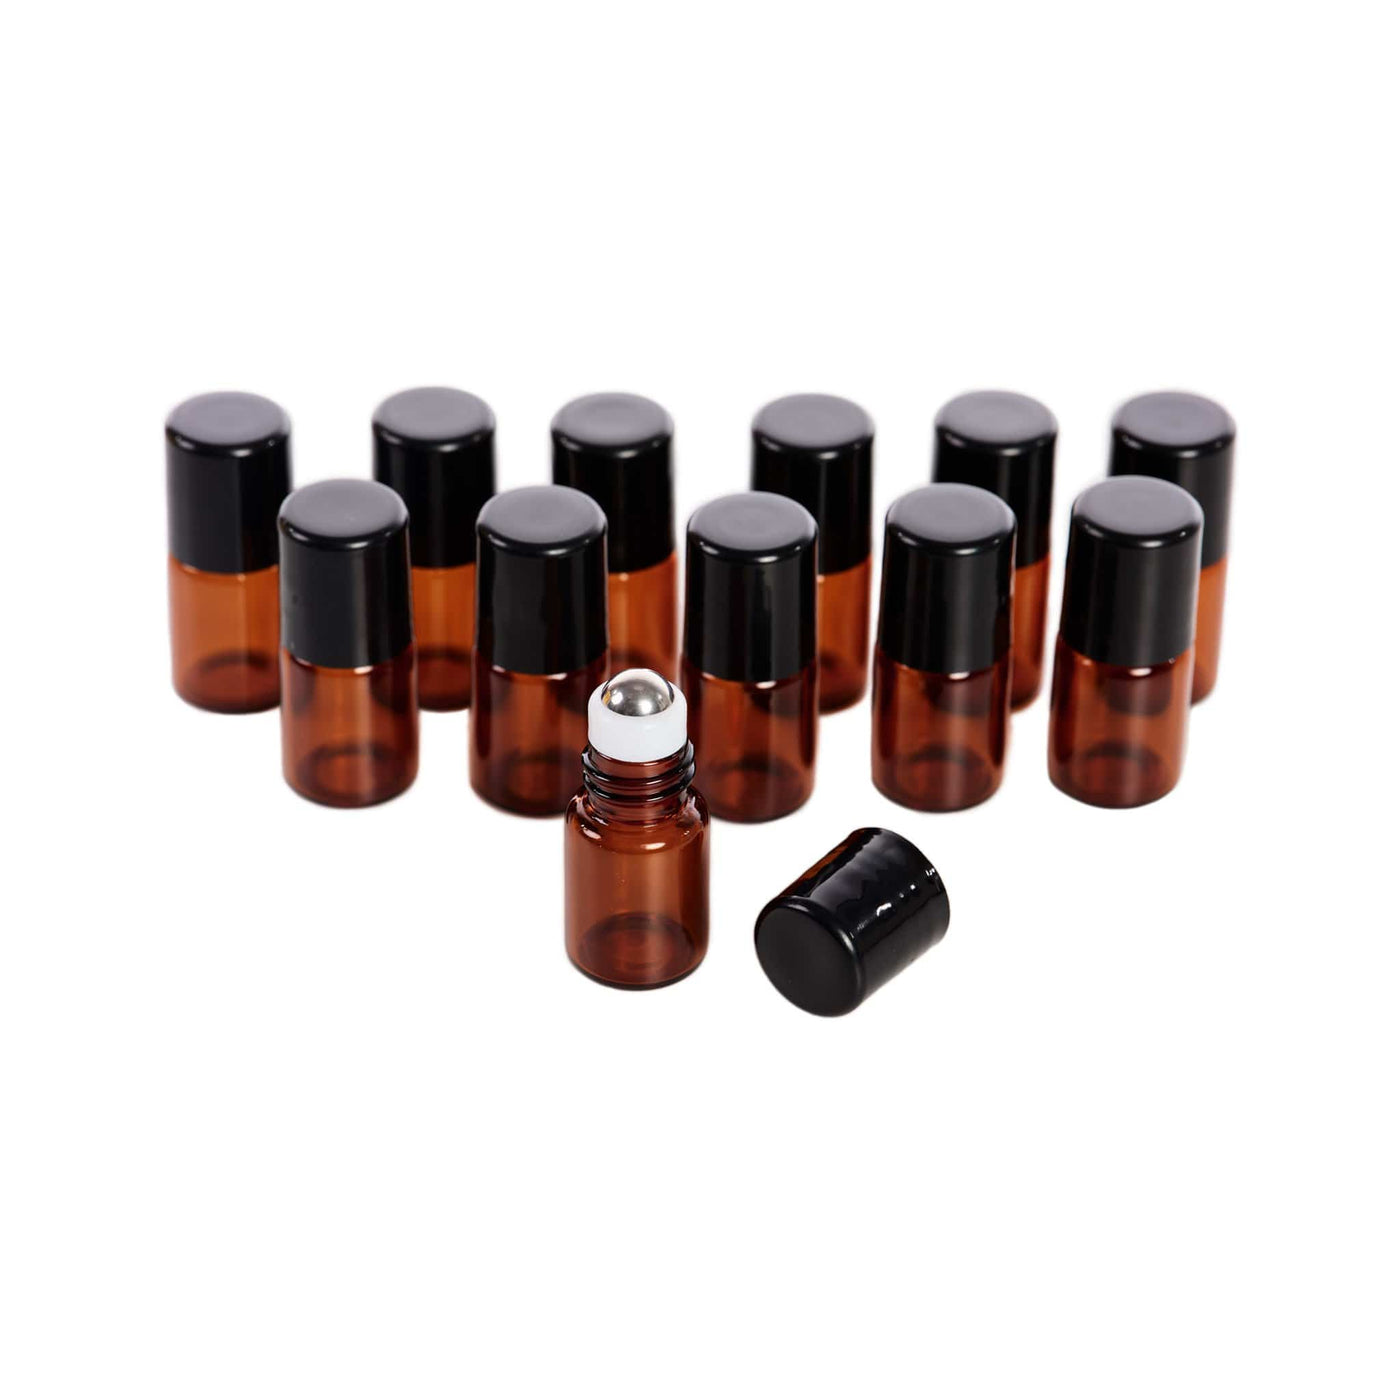 Sample Vial Roller Bottles - Oil Life Canada - Canada's Best Essential Oil Supplies